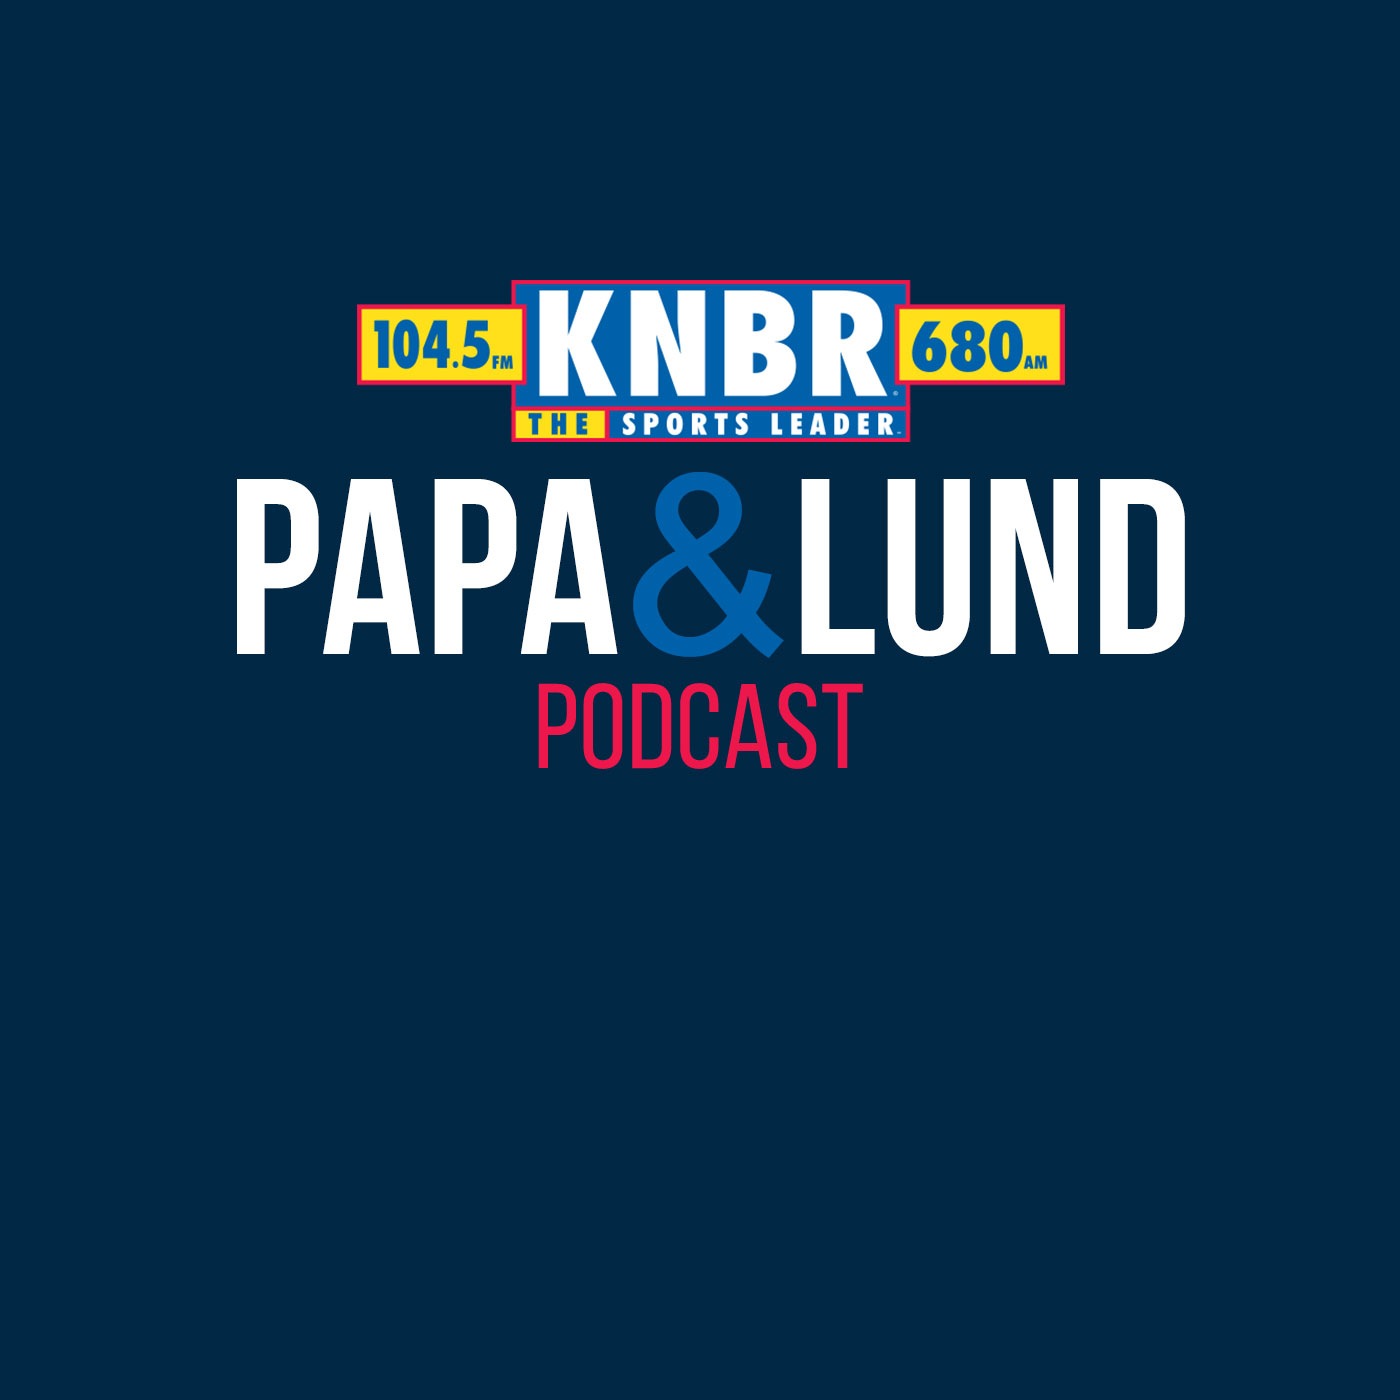 4-16 Papa & Lund Show - Hour 3 - Papa & Lund talk with Kings Play-by-Play announcer Gary Gerould to break down how the Kings could get over the playoff hump